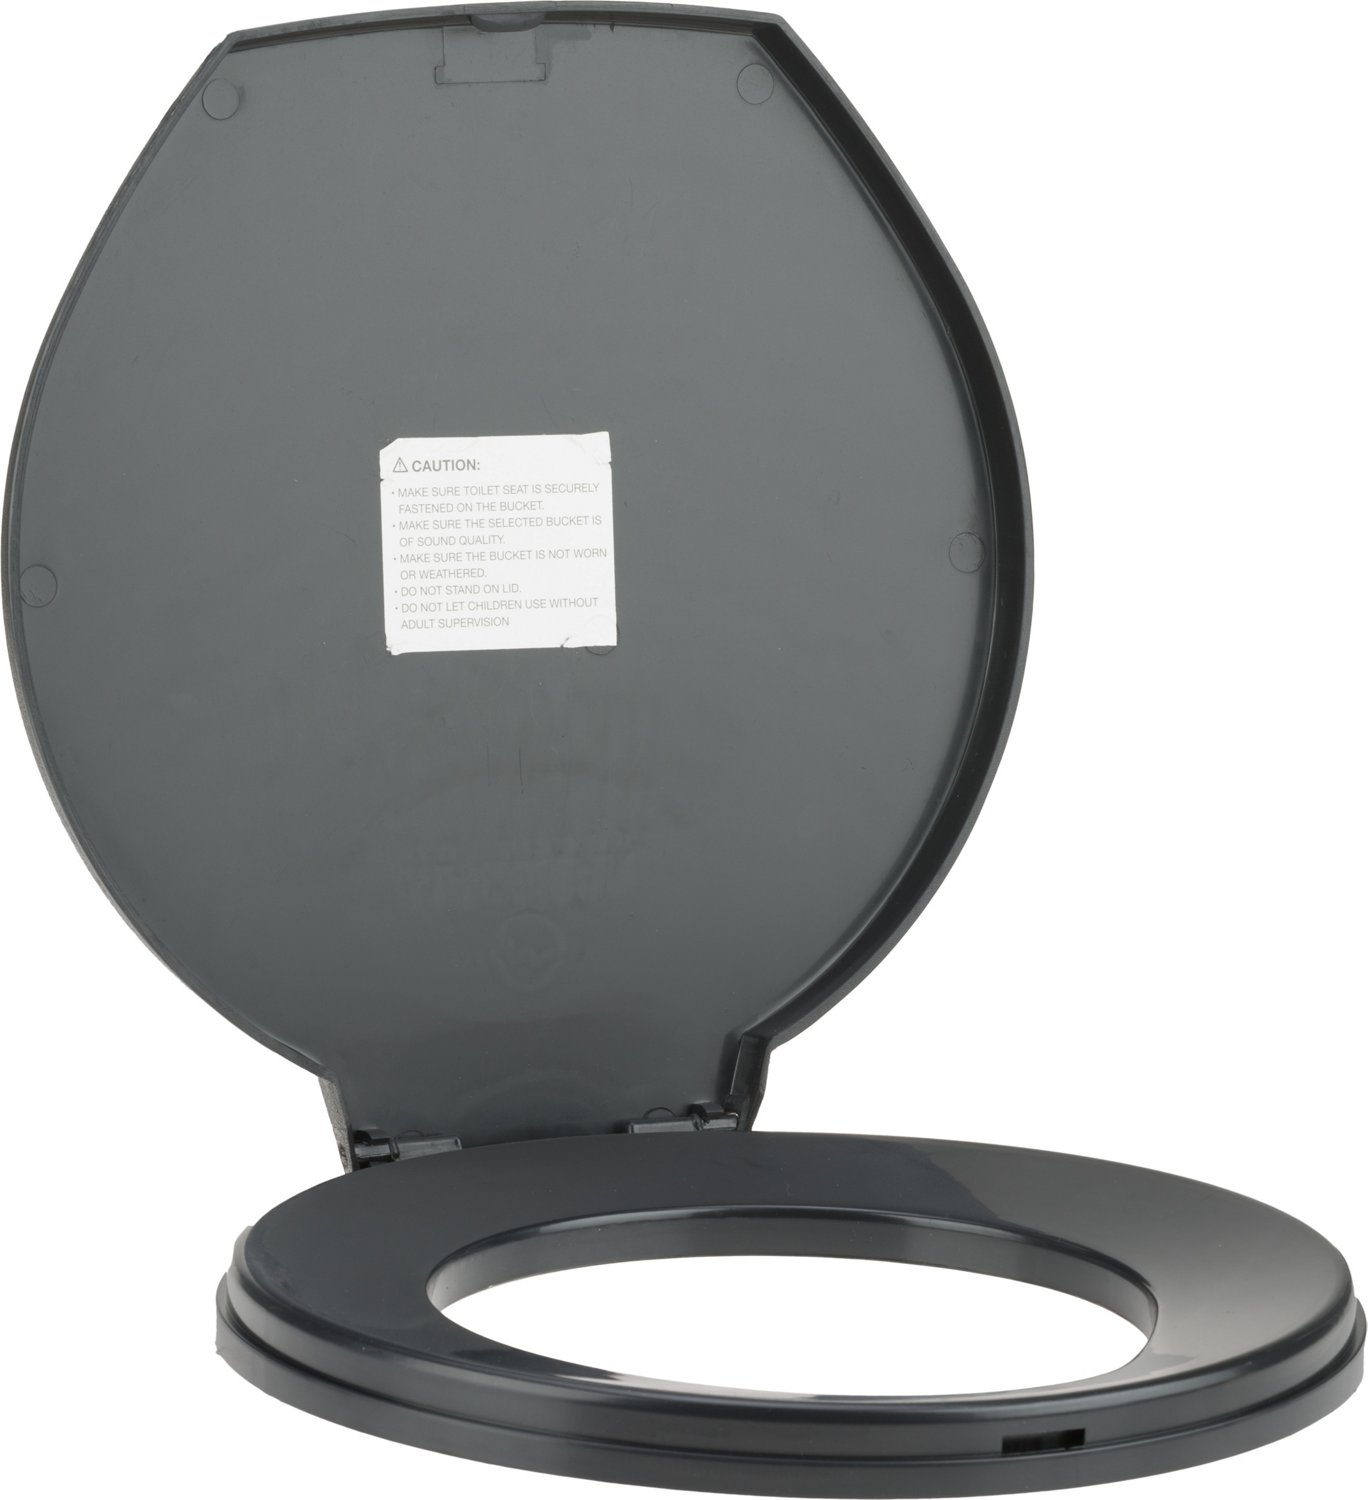 5 Gallon Bucket Toilet Seat w/ Lid Travel Outdoor Camping Hiking